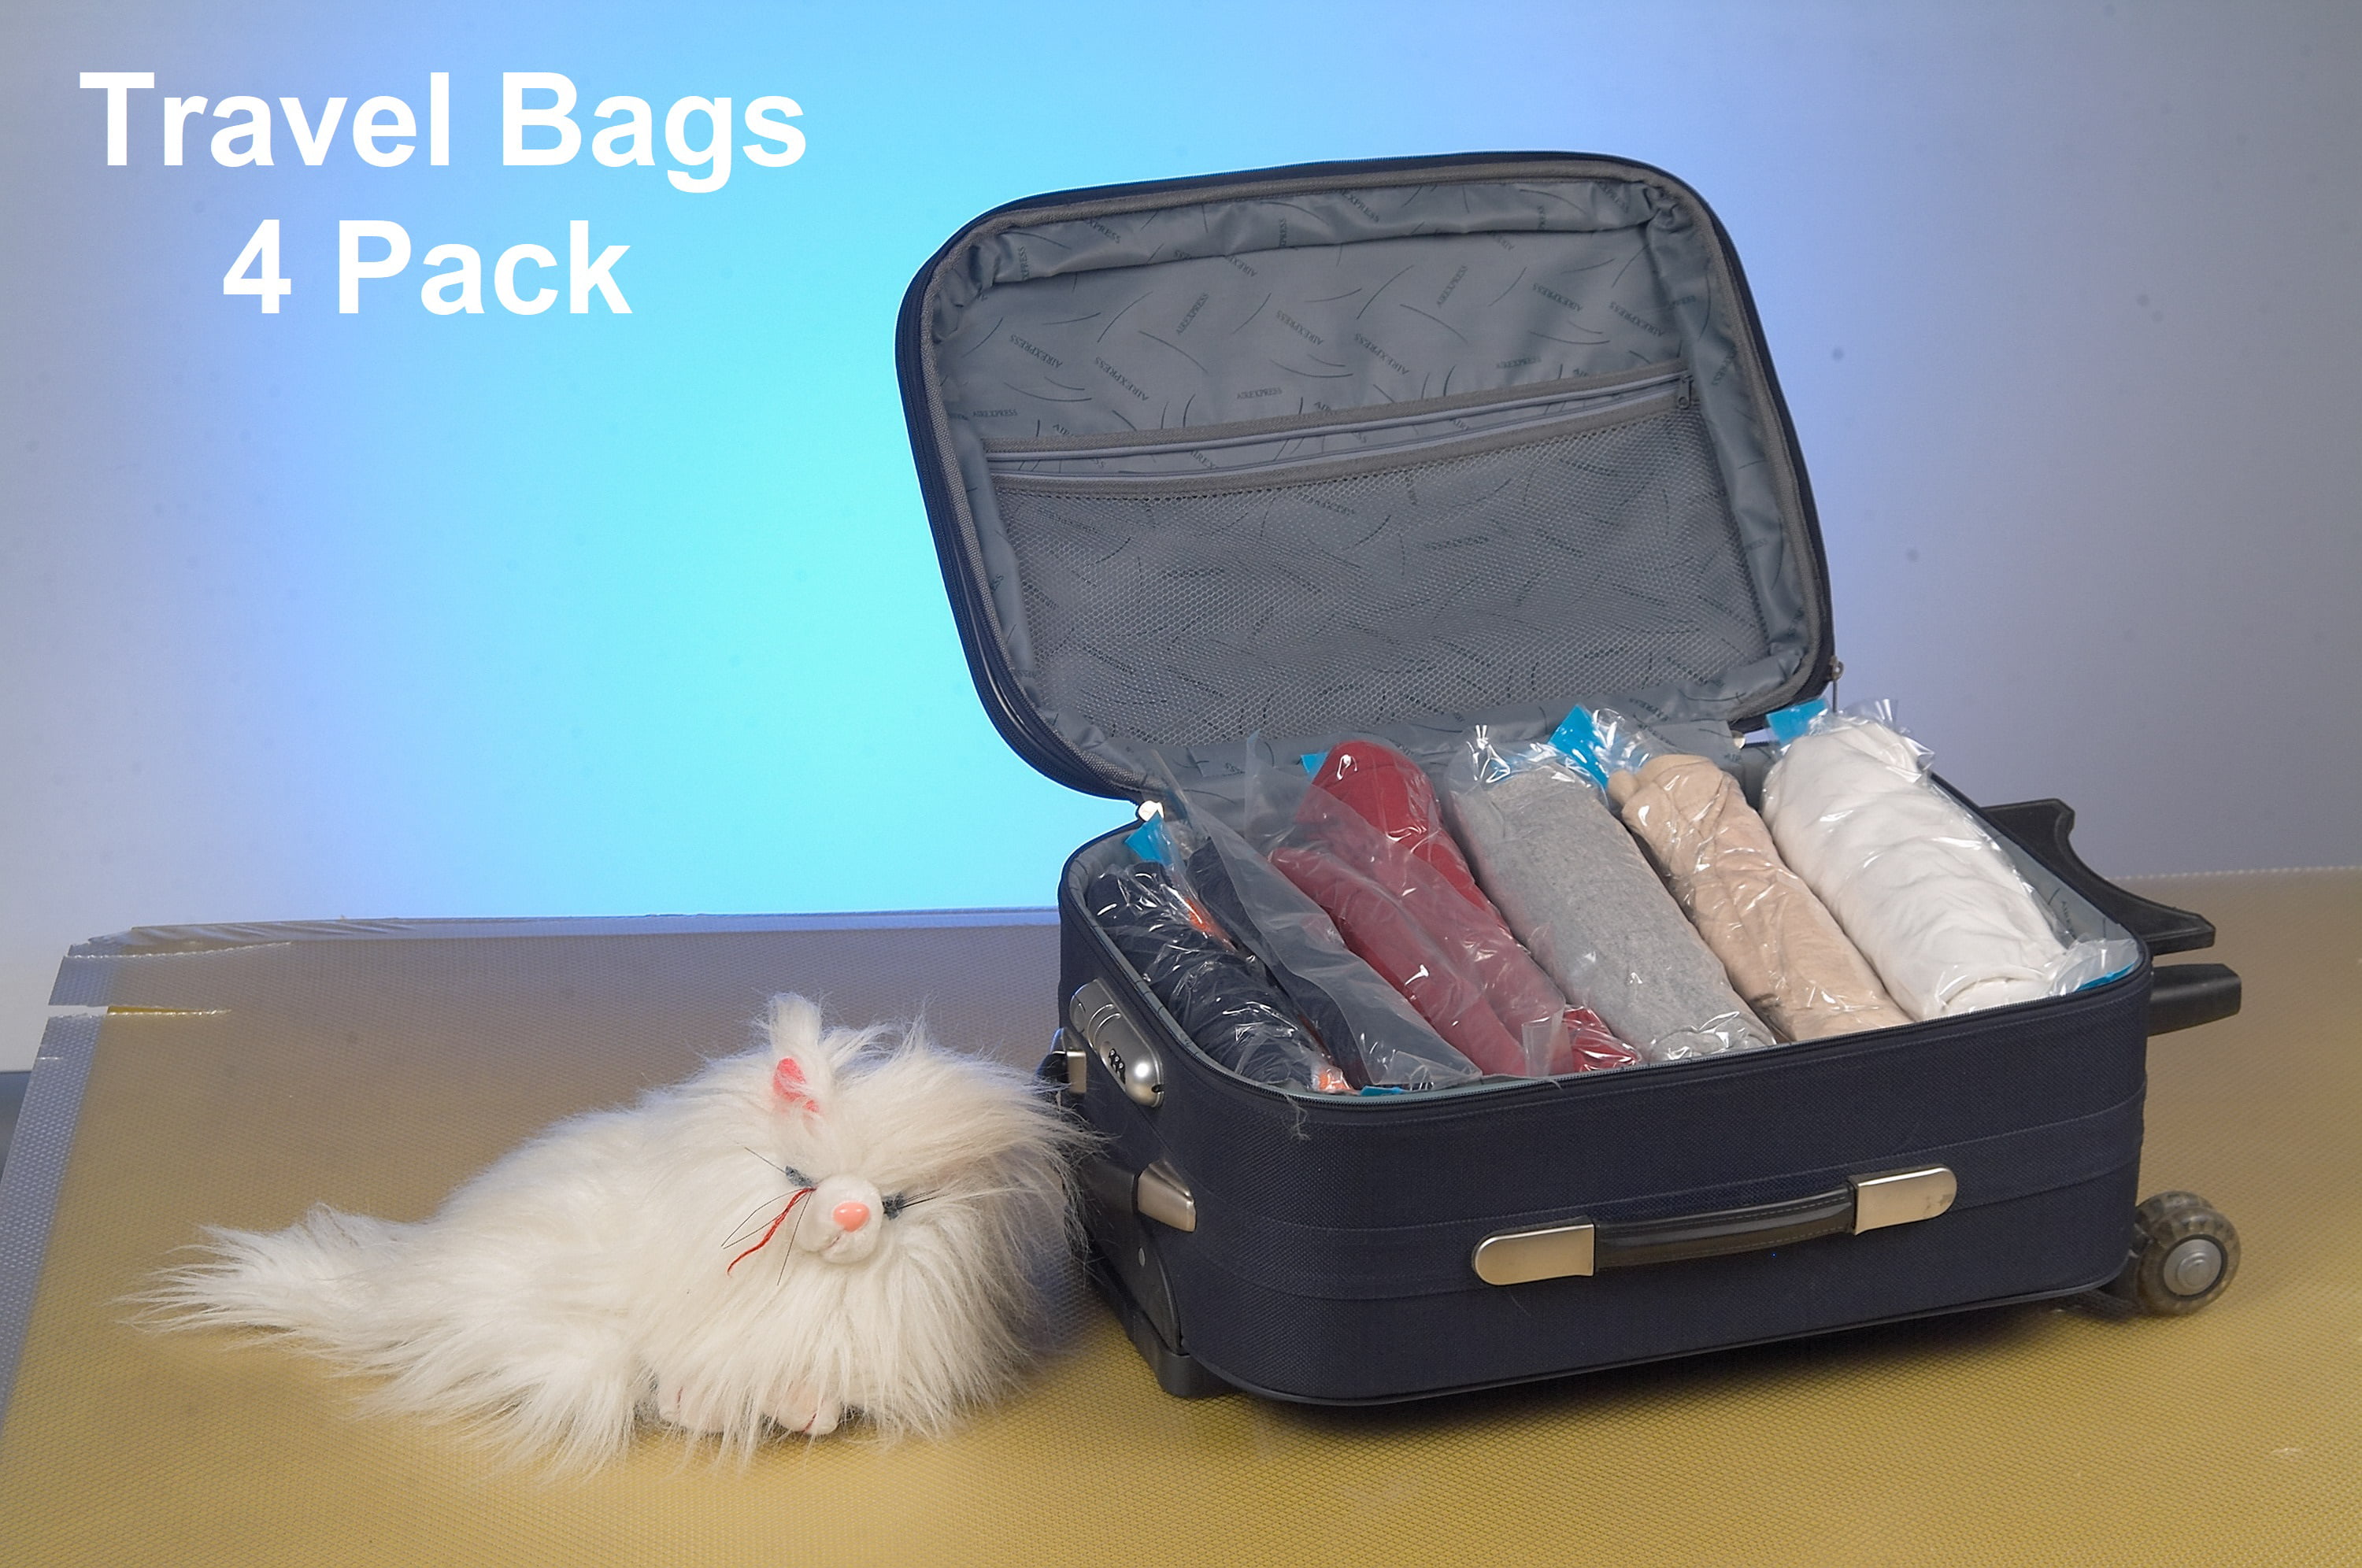 9 Pack: X5 SUPER Jumbo XL LARGEST (53x40in.) Vacuum Space Saver Storage Bag  + X4 Travel Bag (24x16in.)